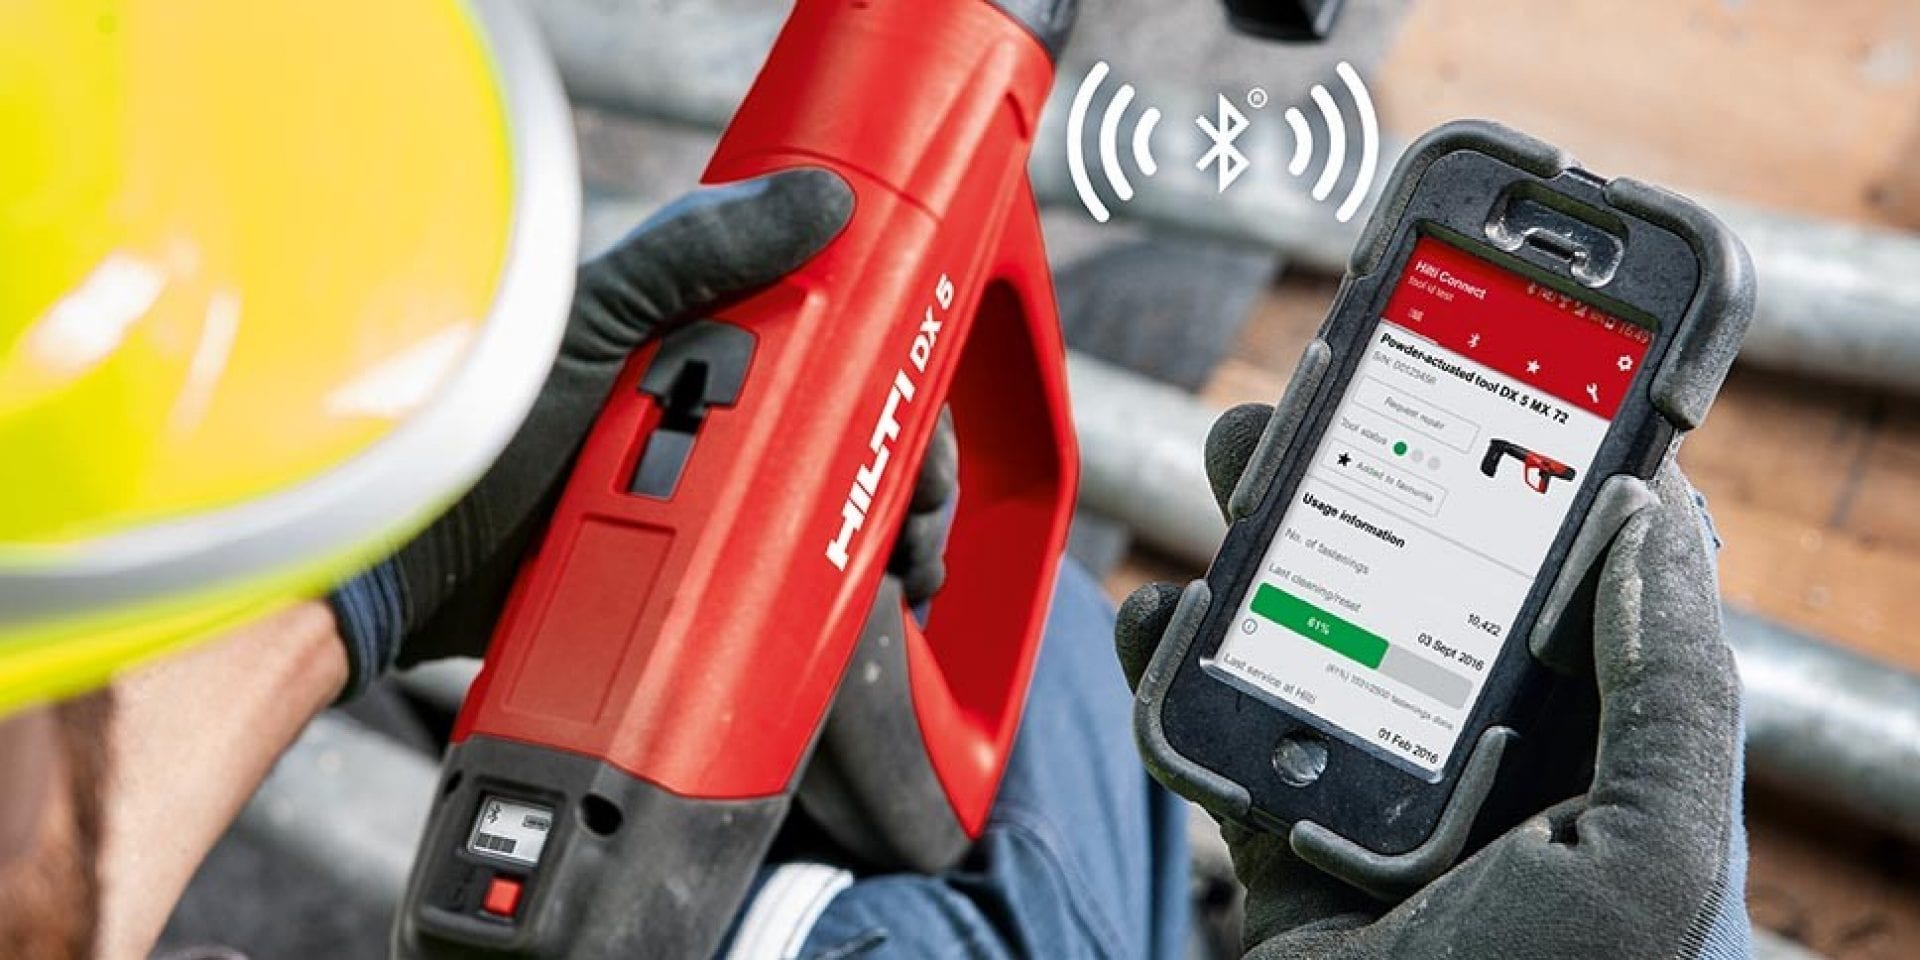 Hilti connected tool